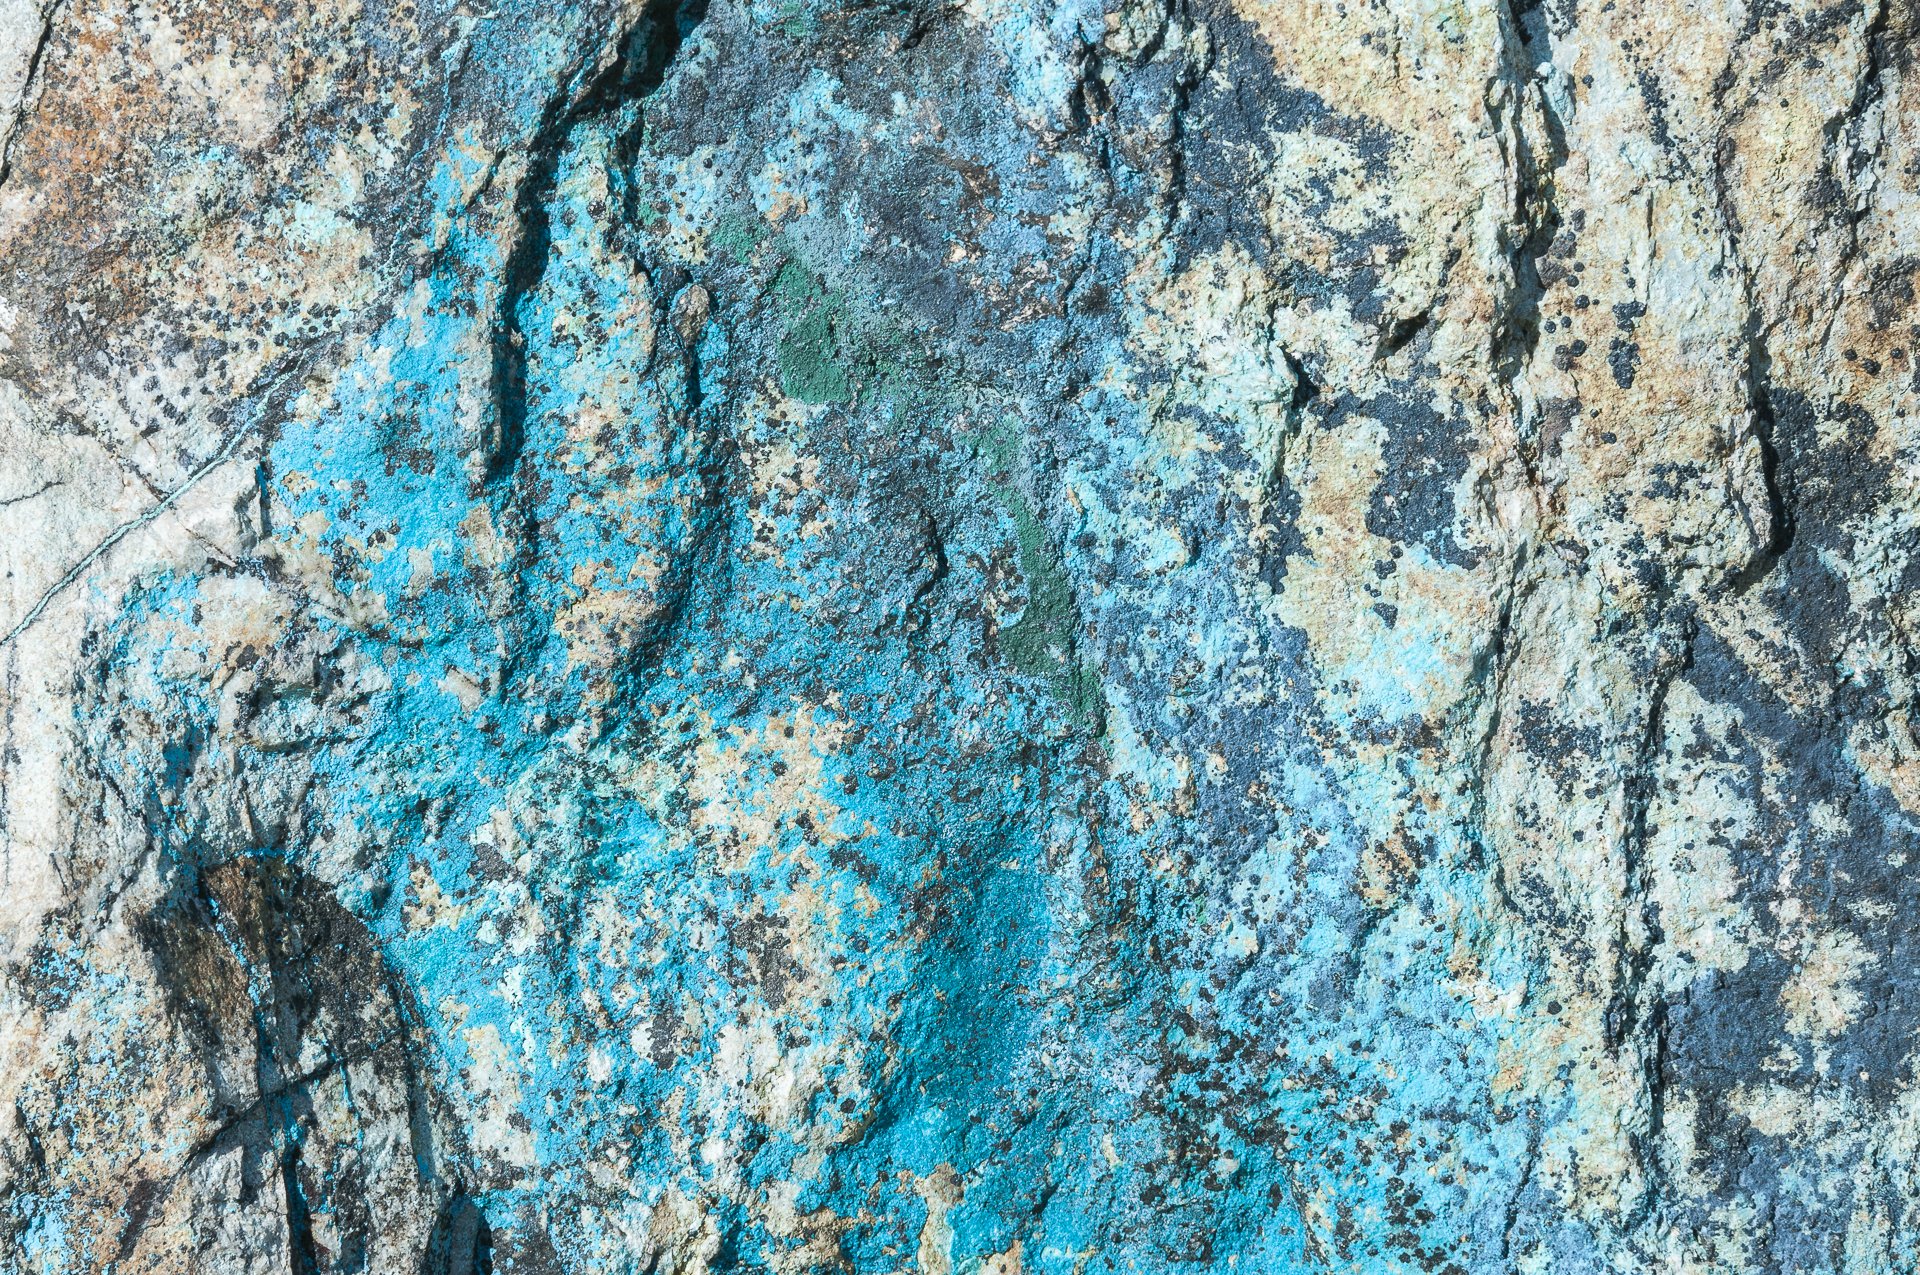  Copper-bearing minerals such as chrysocolla, azurite and malachite.